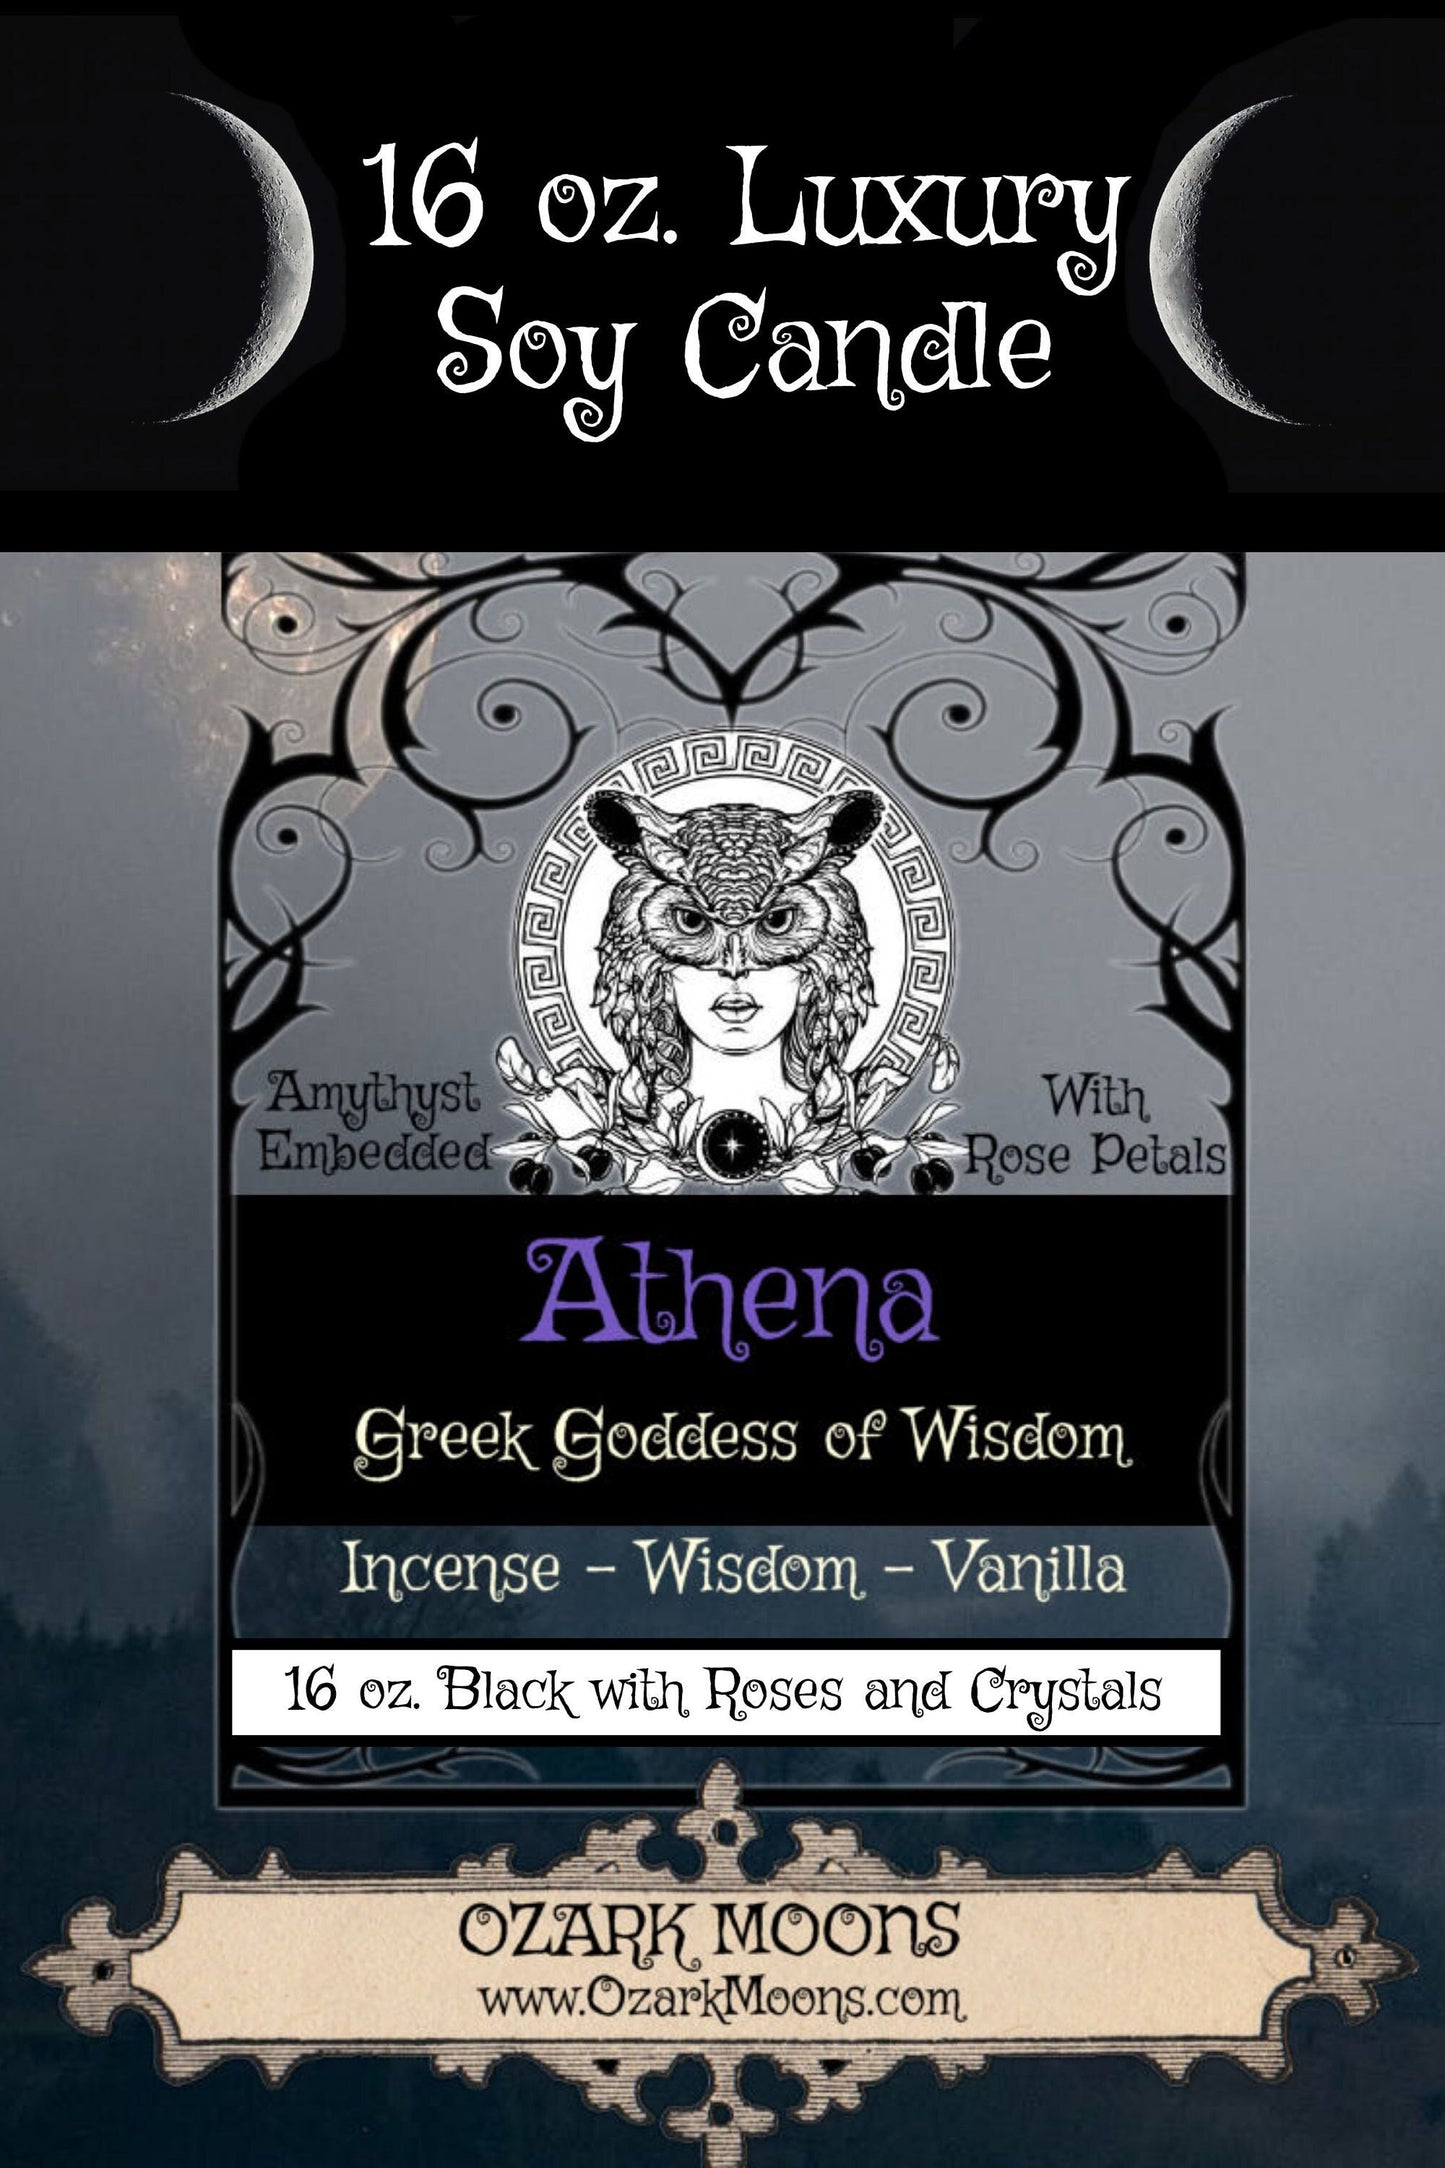 ATHENA 16oz Goddess of Wisdom Crystal Candle - Incense and Vanilla with Amethyst Crystals & Rose Petals - Mythology, Witch, Wicca, Pagan